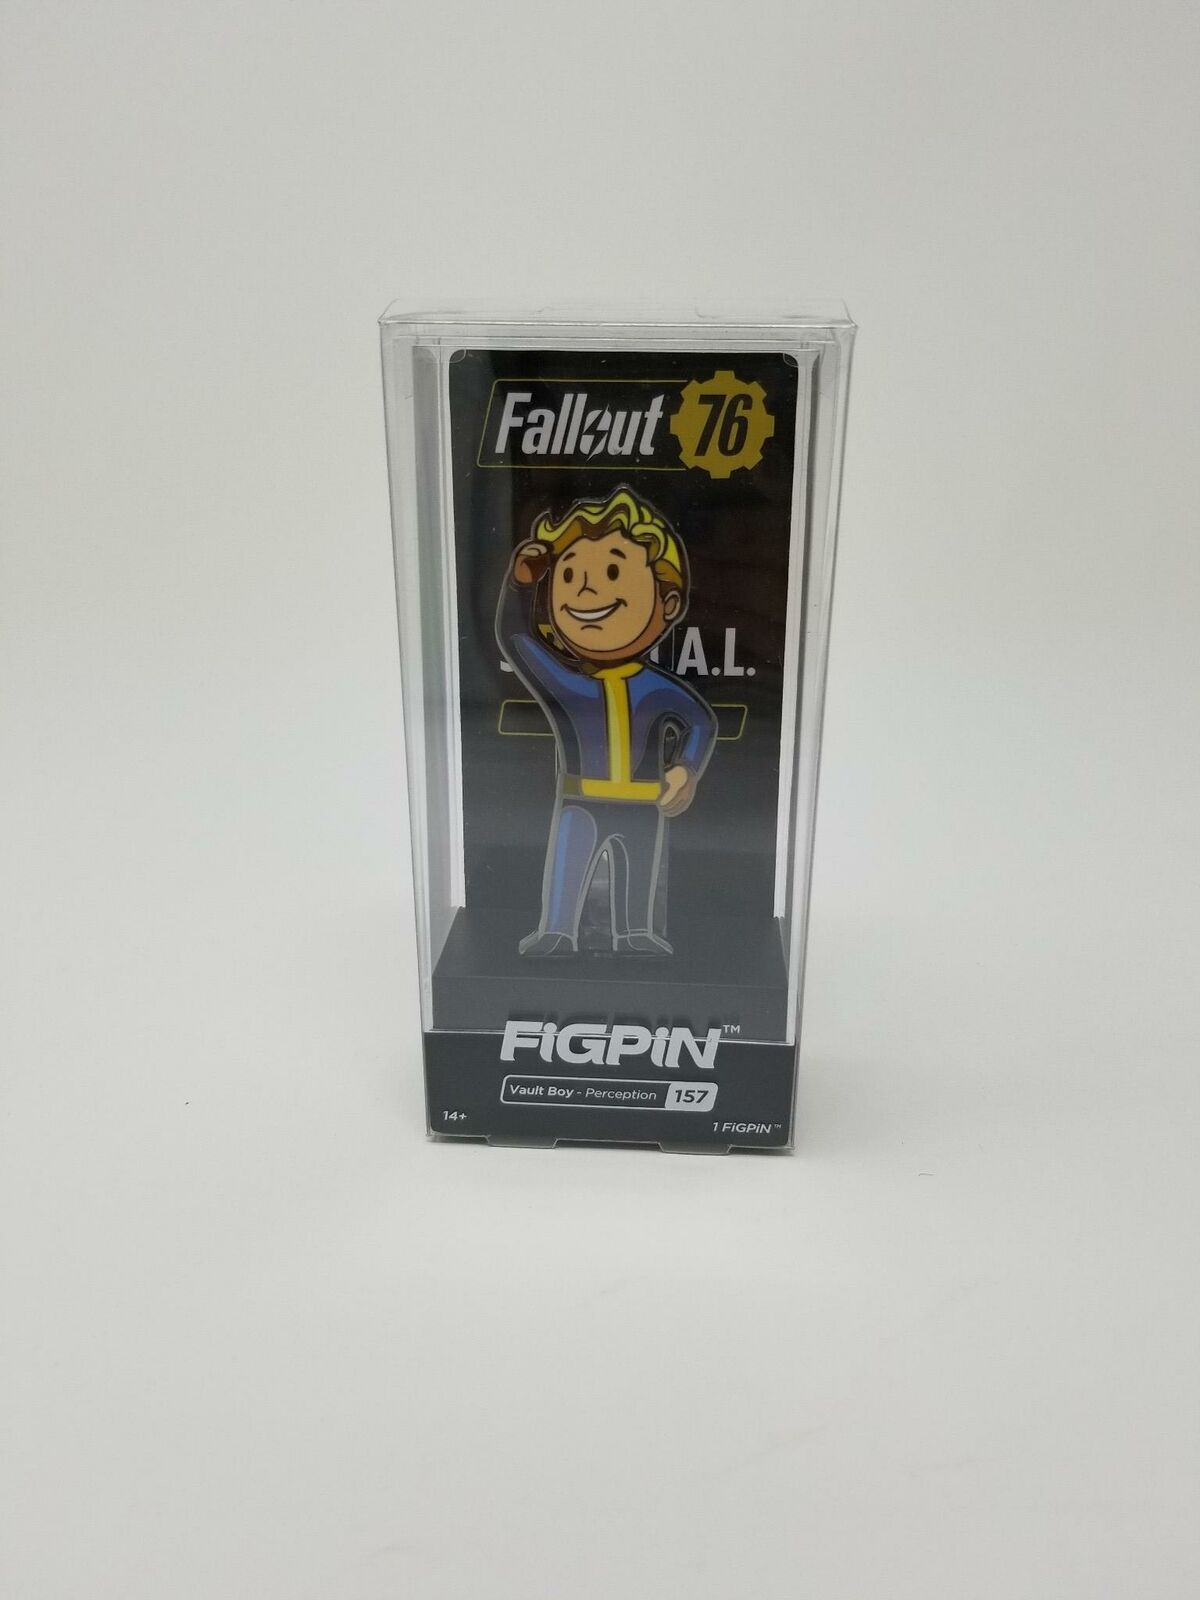 Fallout 76 FigPin 157 Vault Boy Perception SPECIAL Series Limited to 1000